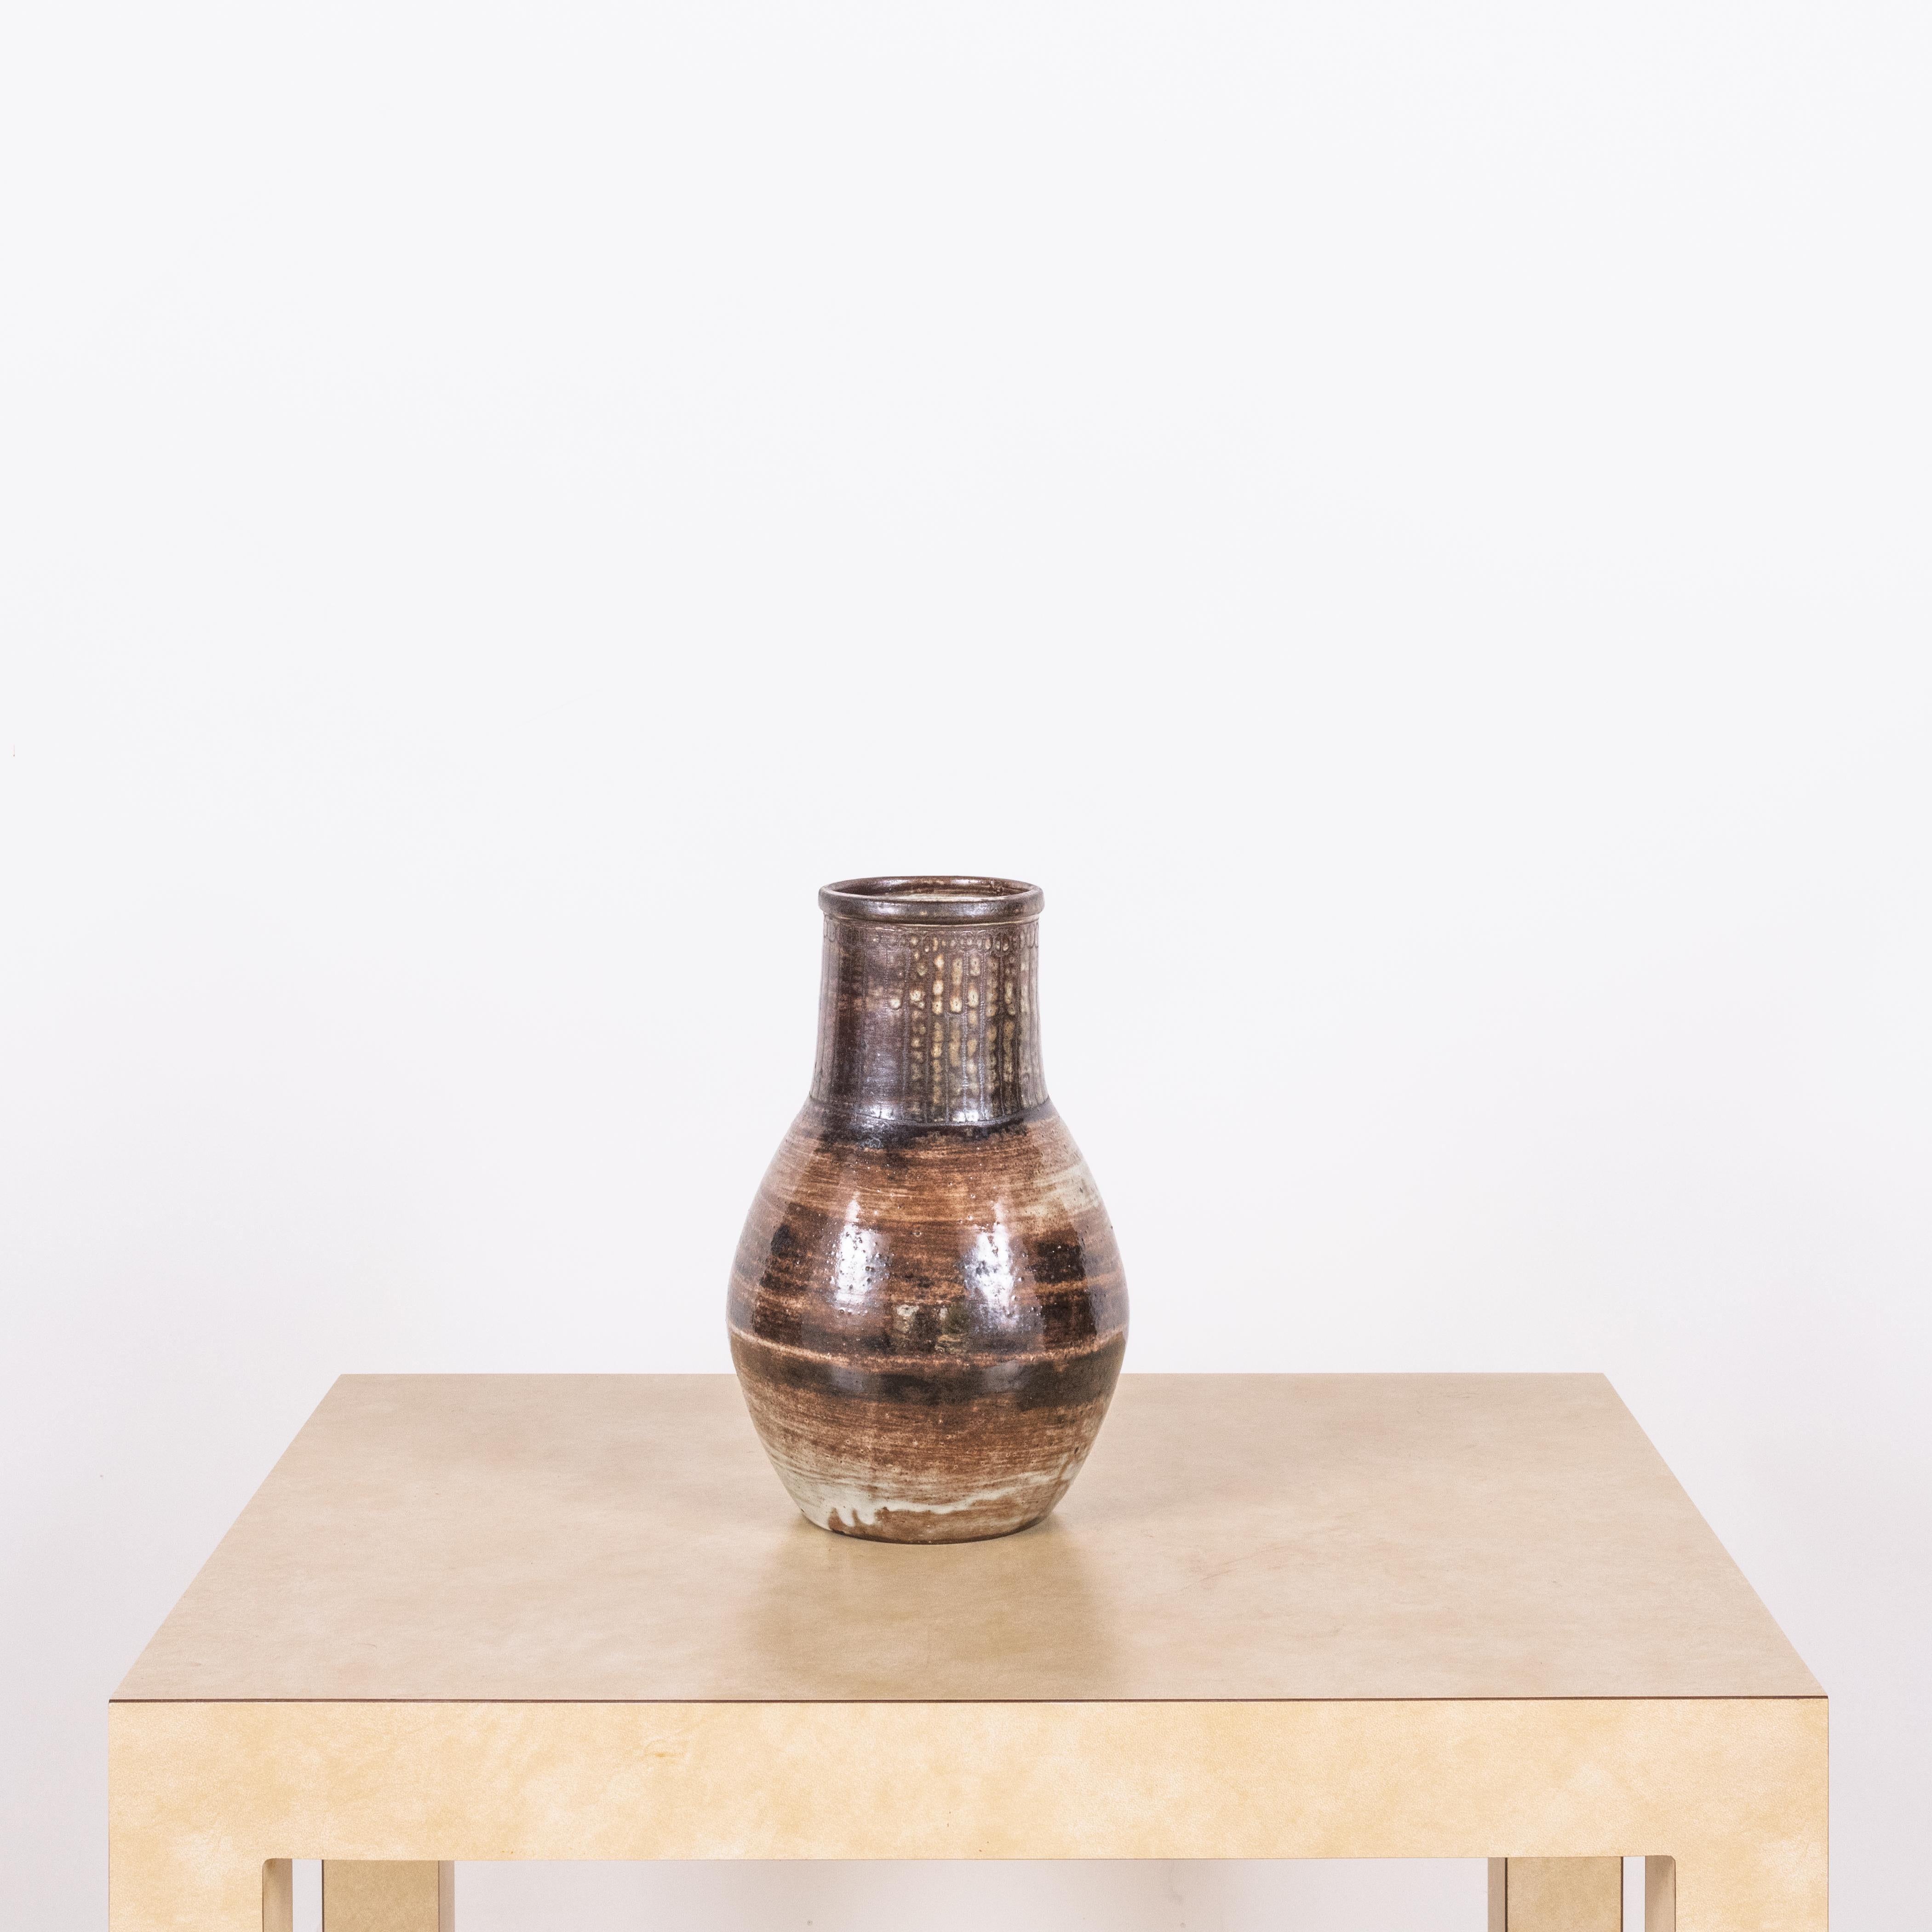 Important French ceramic vase by Jacques Pouchain / Atelier Dieulefit in cream glaze with brown geometric decor.

Signed.

Jacques Pouchain (1925-2015) left Paris and set up a studio in Dieulefit in the Drôme region of Southern France in the 1950s.